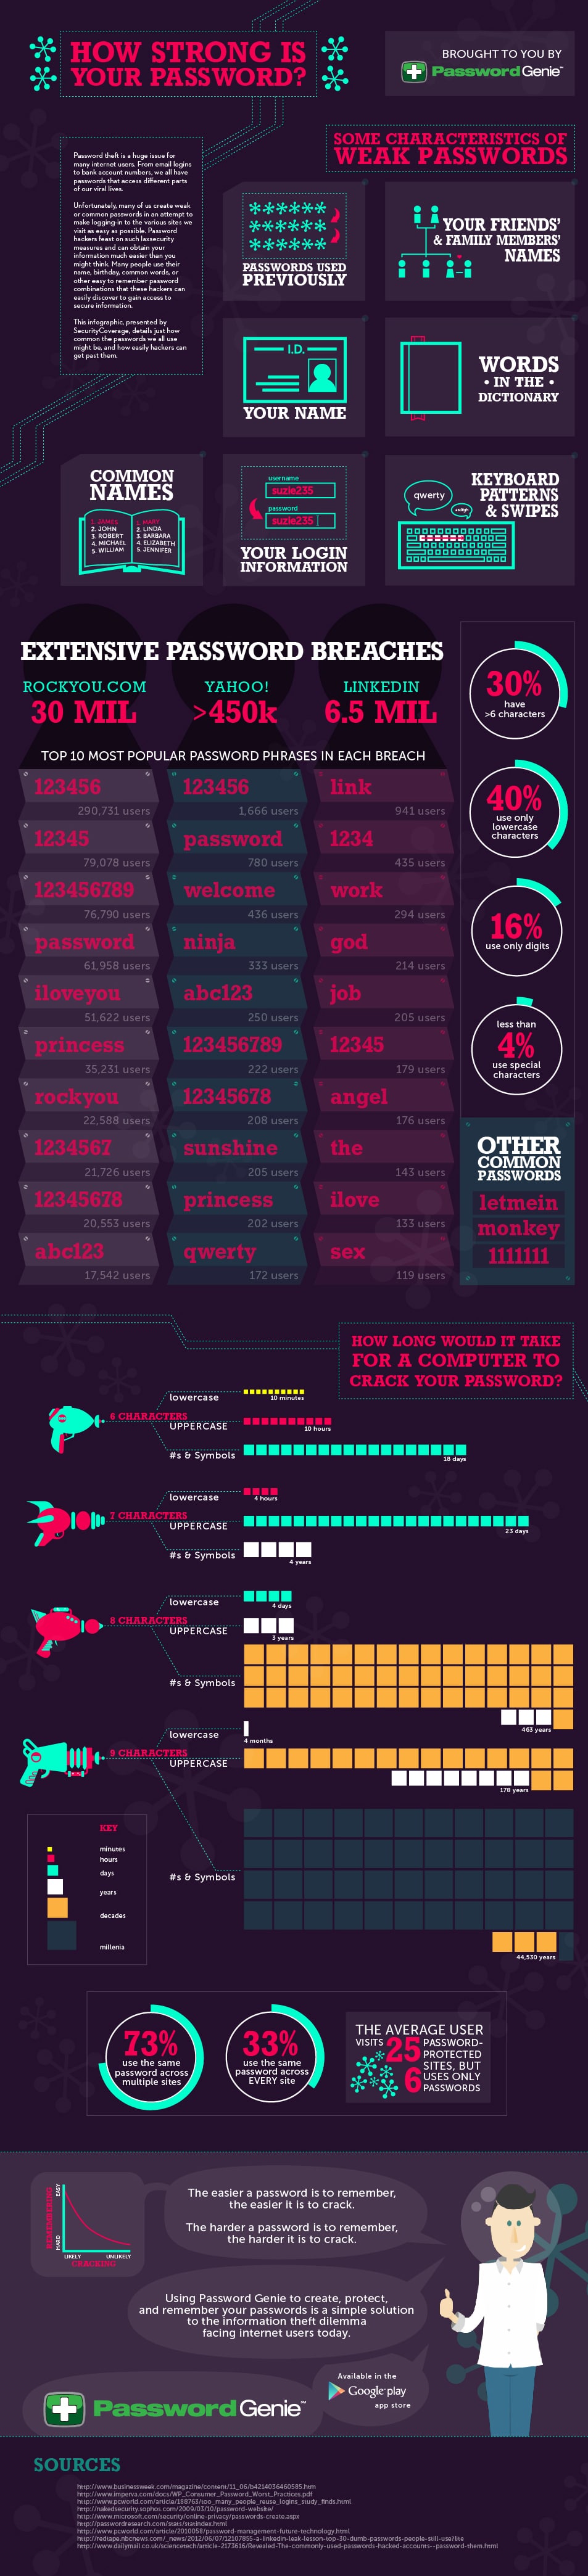 password-strength-security-breach-infographic